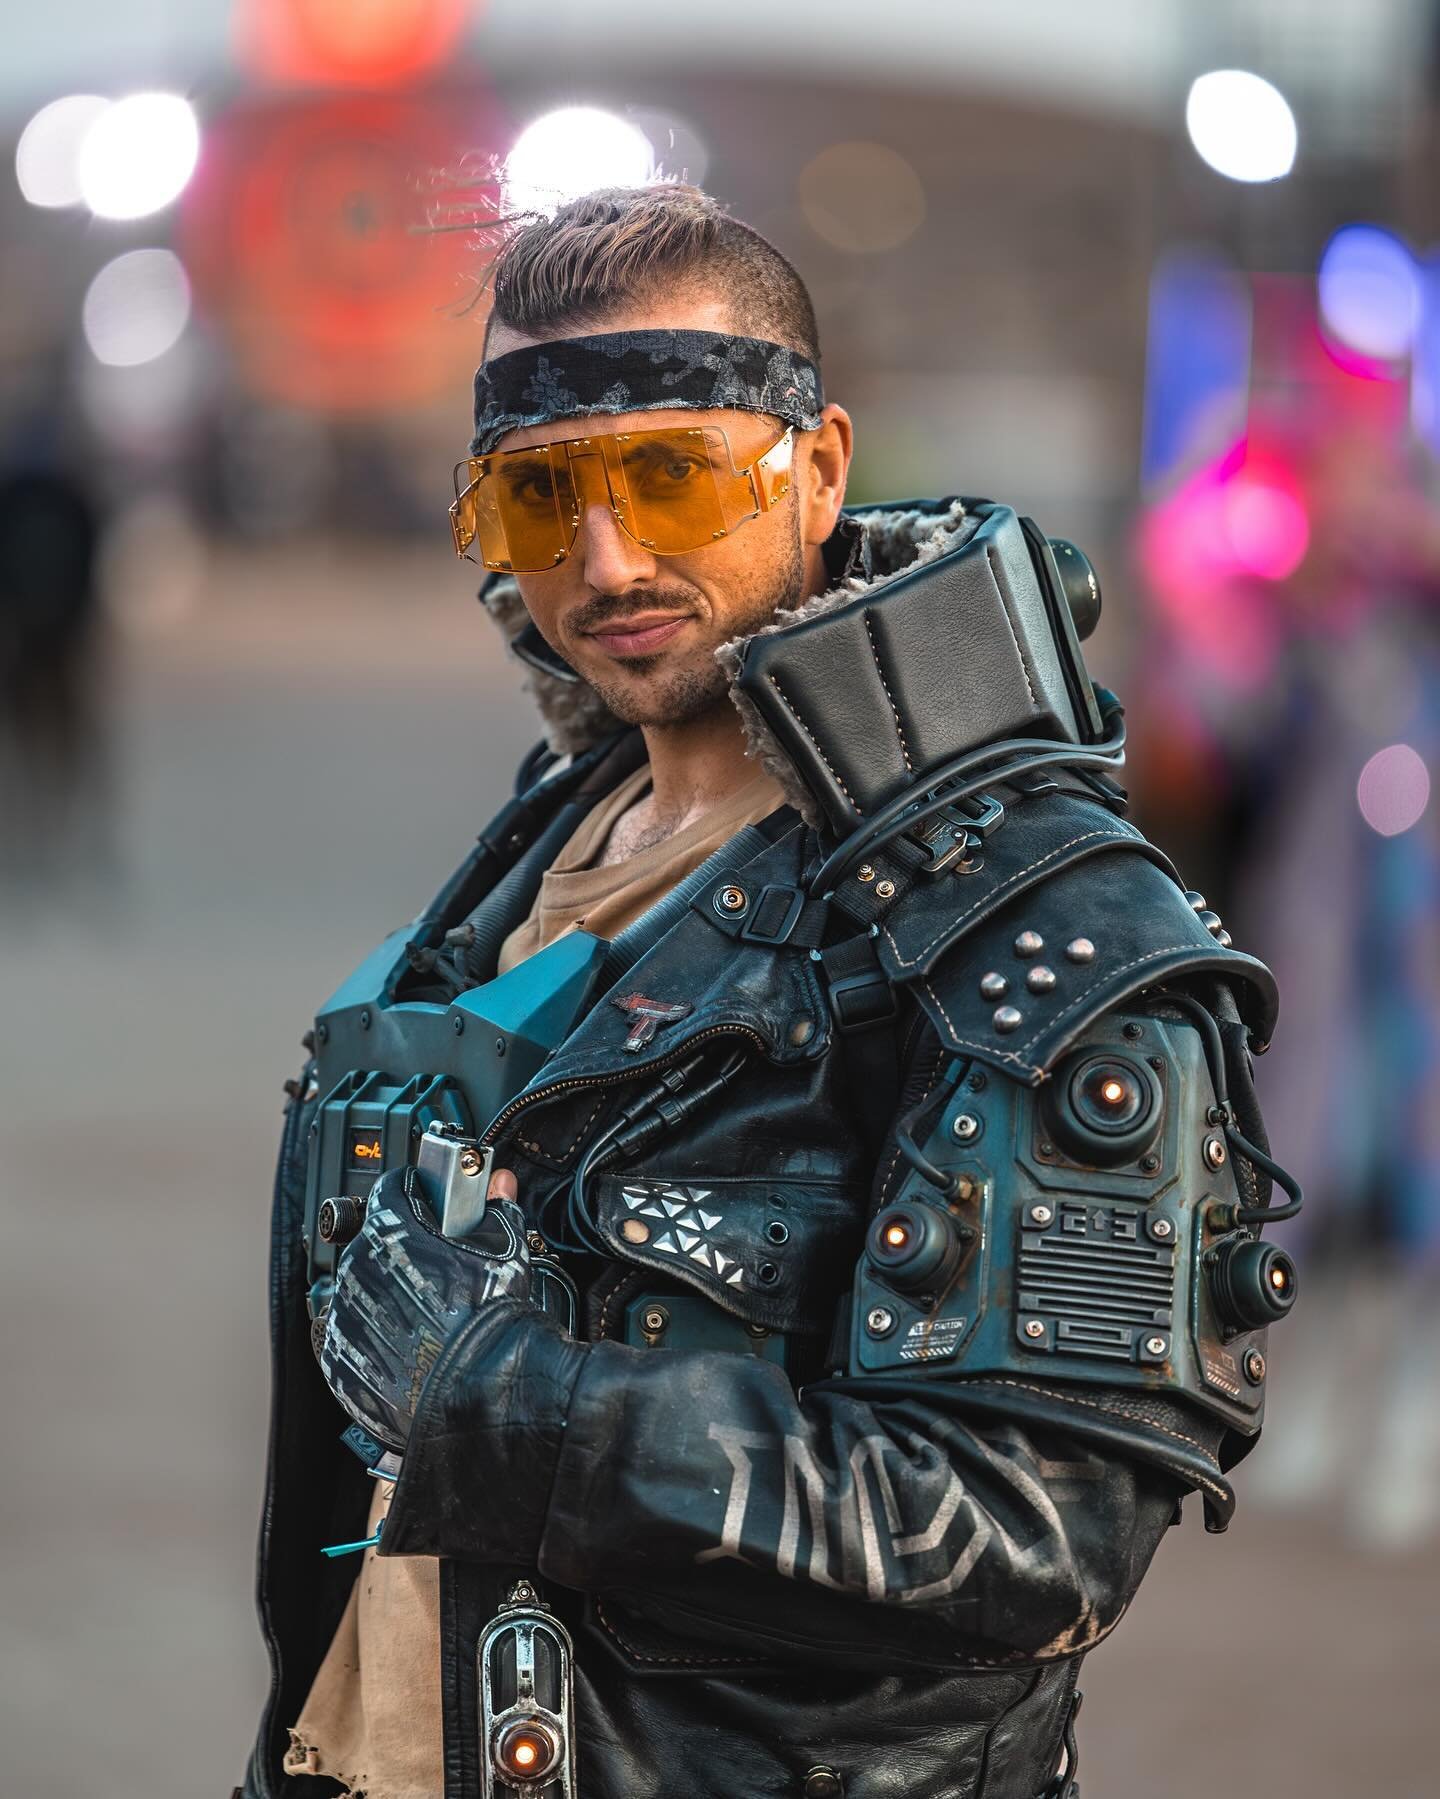 Fit check. @neotropolisevent photos rolling in.

Were you there this year? Loved seeing how everything came together for year 3. Seriously the best yet for immersion. Photography by @ynevrov, color grade by me. 

#cyberpunkaesthetic #cyberpunkstyle #